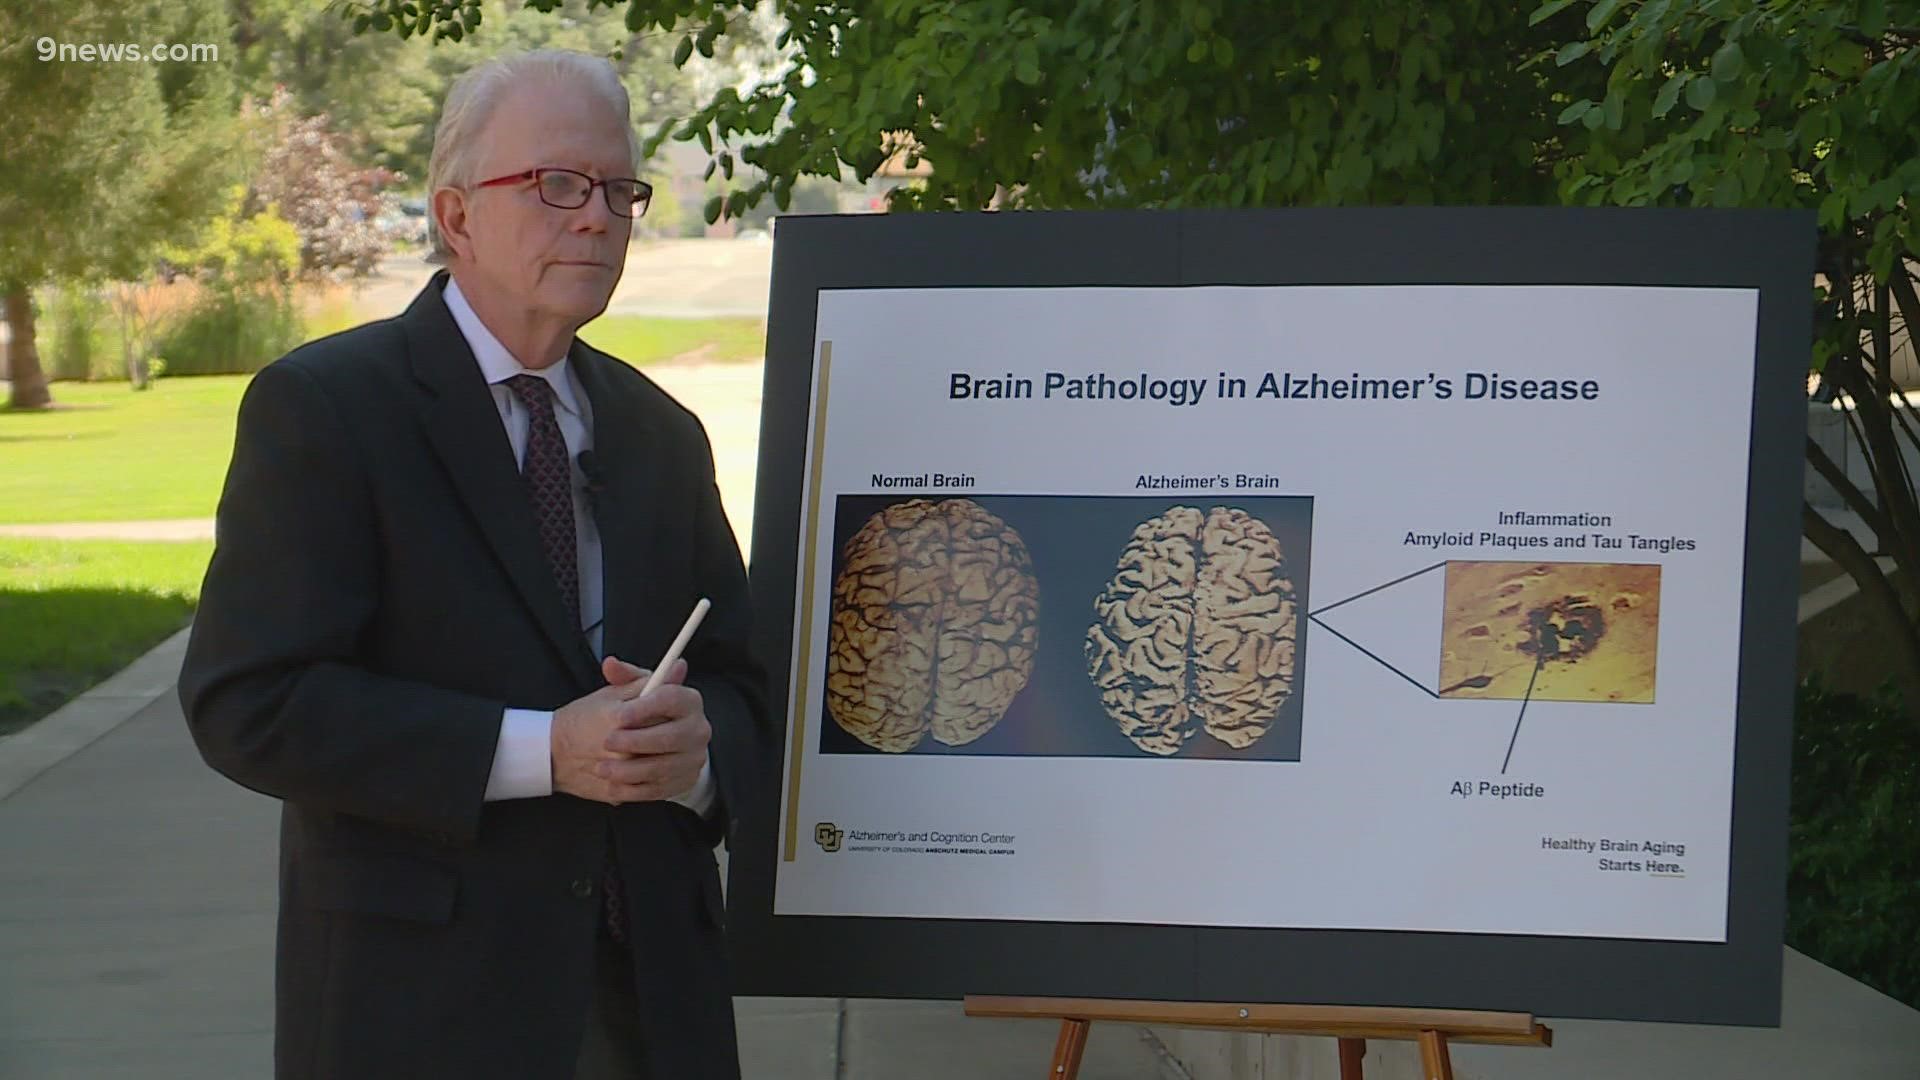 Dr. Huntington Potter is Professor of Neurology at CU Anschutz. He says new research shows a connection between COVID-19 and Alzheimer's disease.